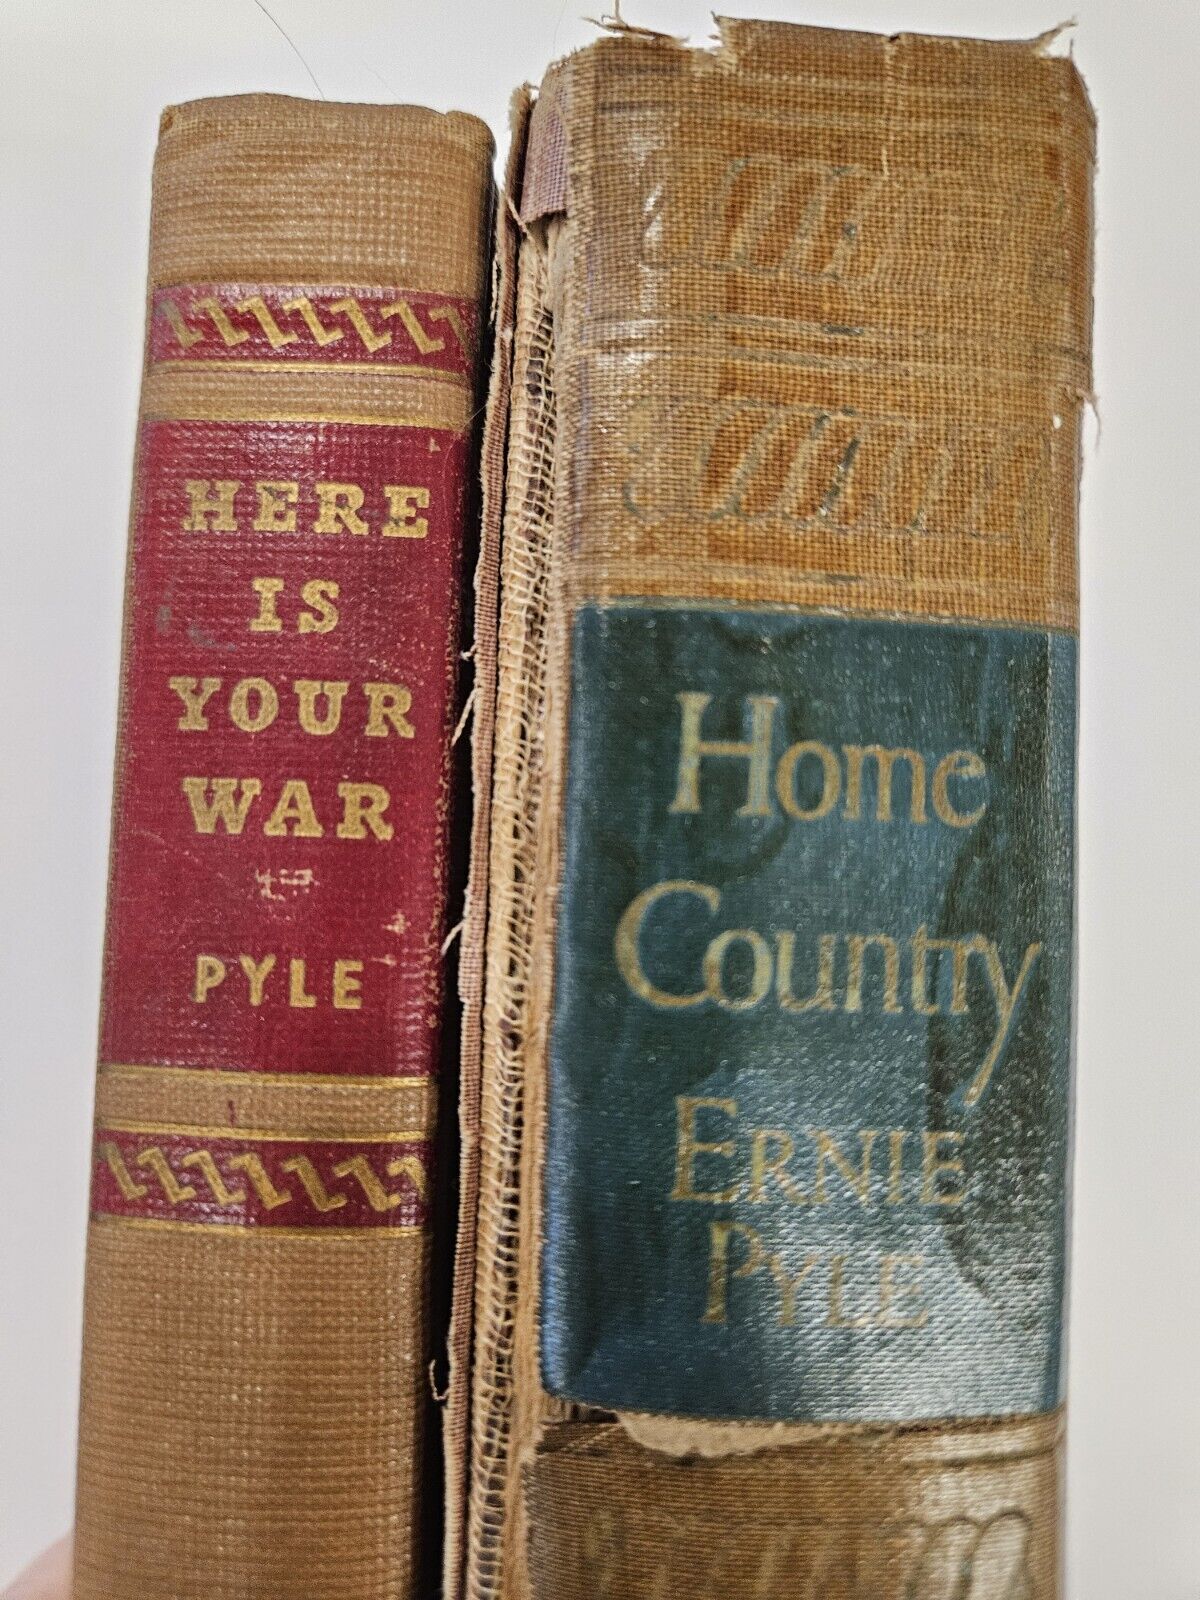 here is your war book ernie pyle 1943